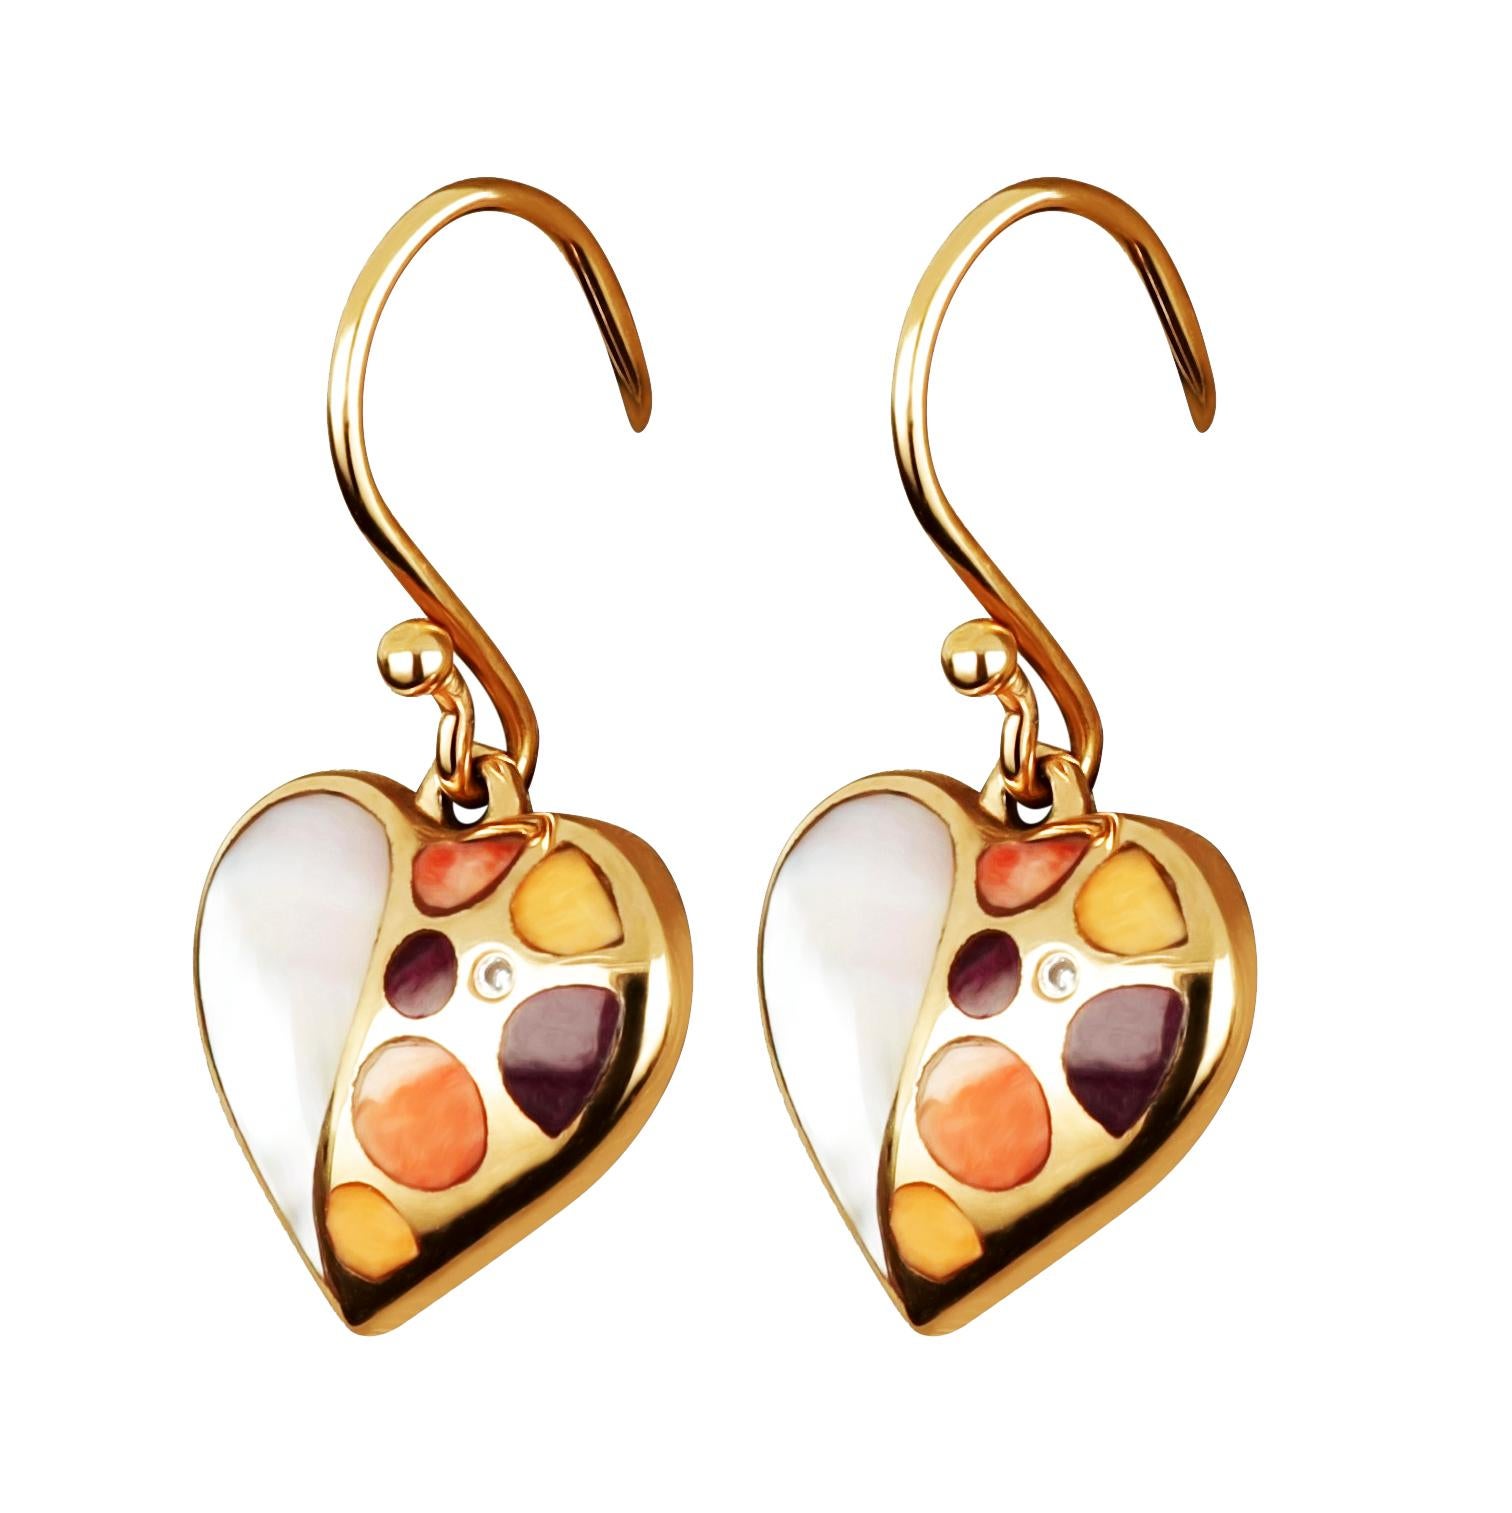 Contemporary 18 karat rose gold earrings featuring perfectly proportioned heart shapes that lead the eye to the exquisite coral and ruby stones, brought to life in blazing mother of pearls.
18 Karat Rose Gold
Weight: 2.74 g